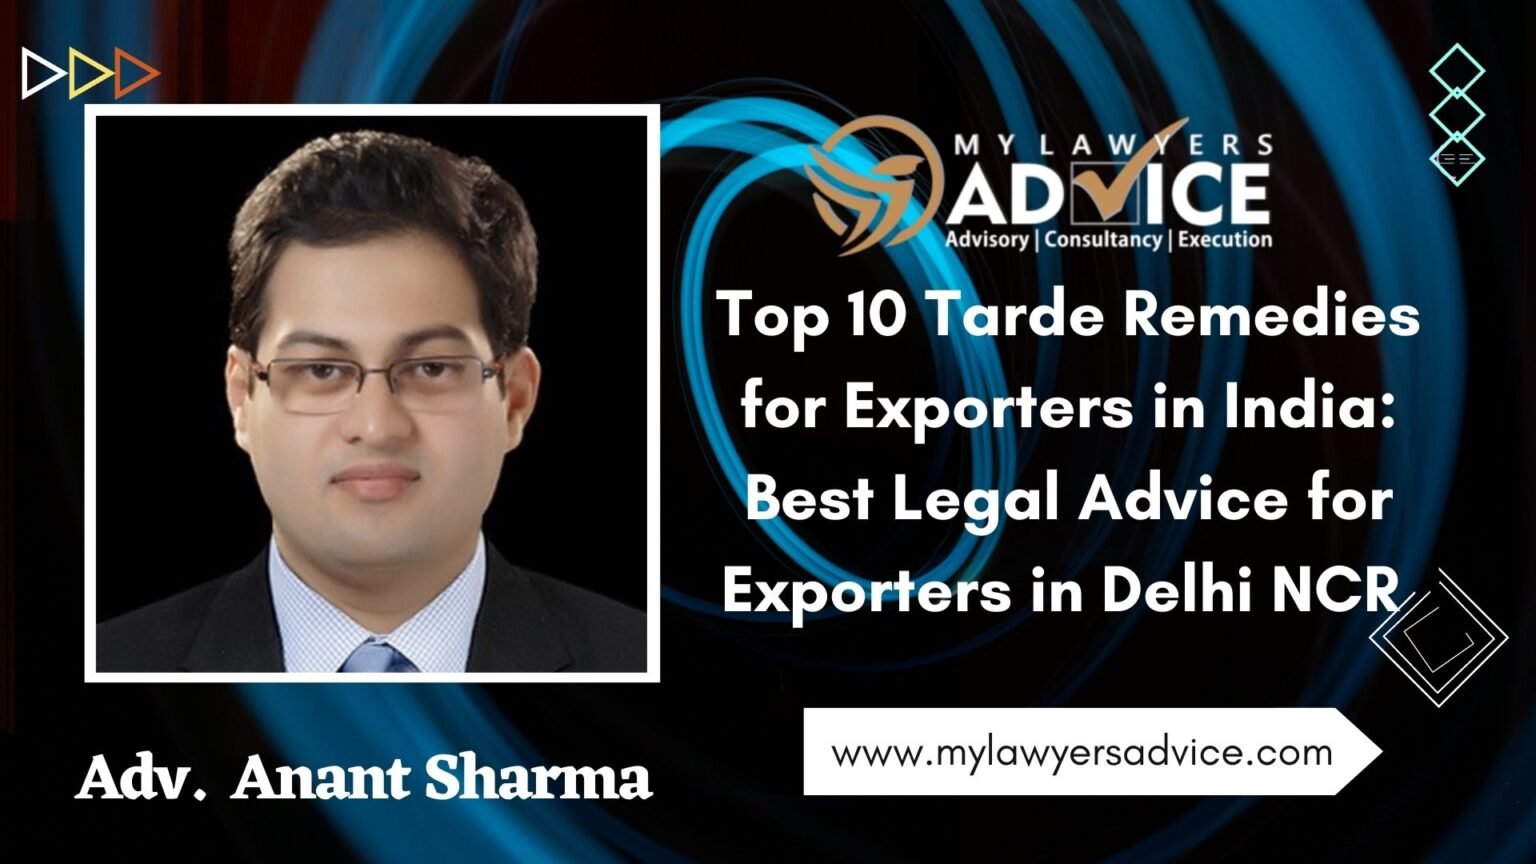 Top 10 Trade Remedies for Exporters in India: Best Legal Advice for Exporters in Delhi NCR